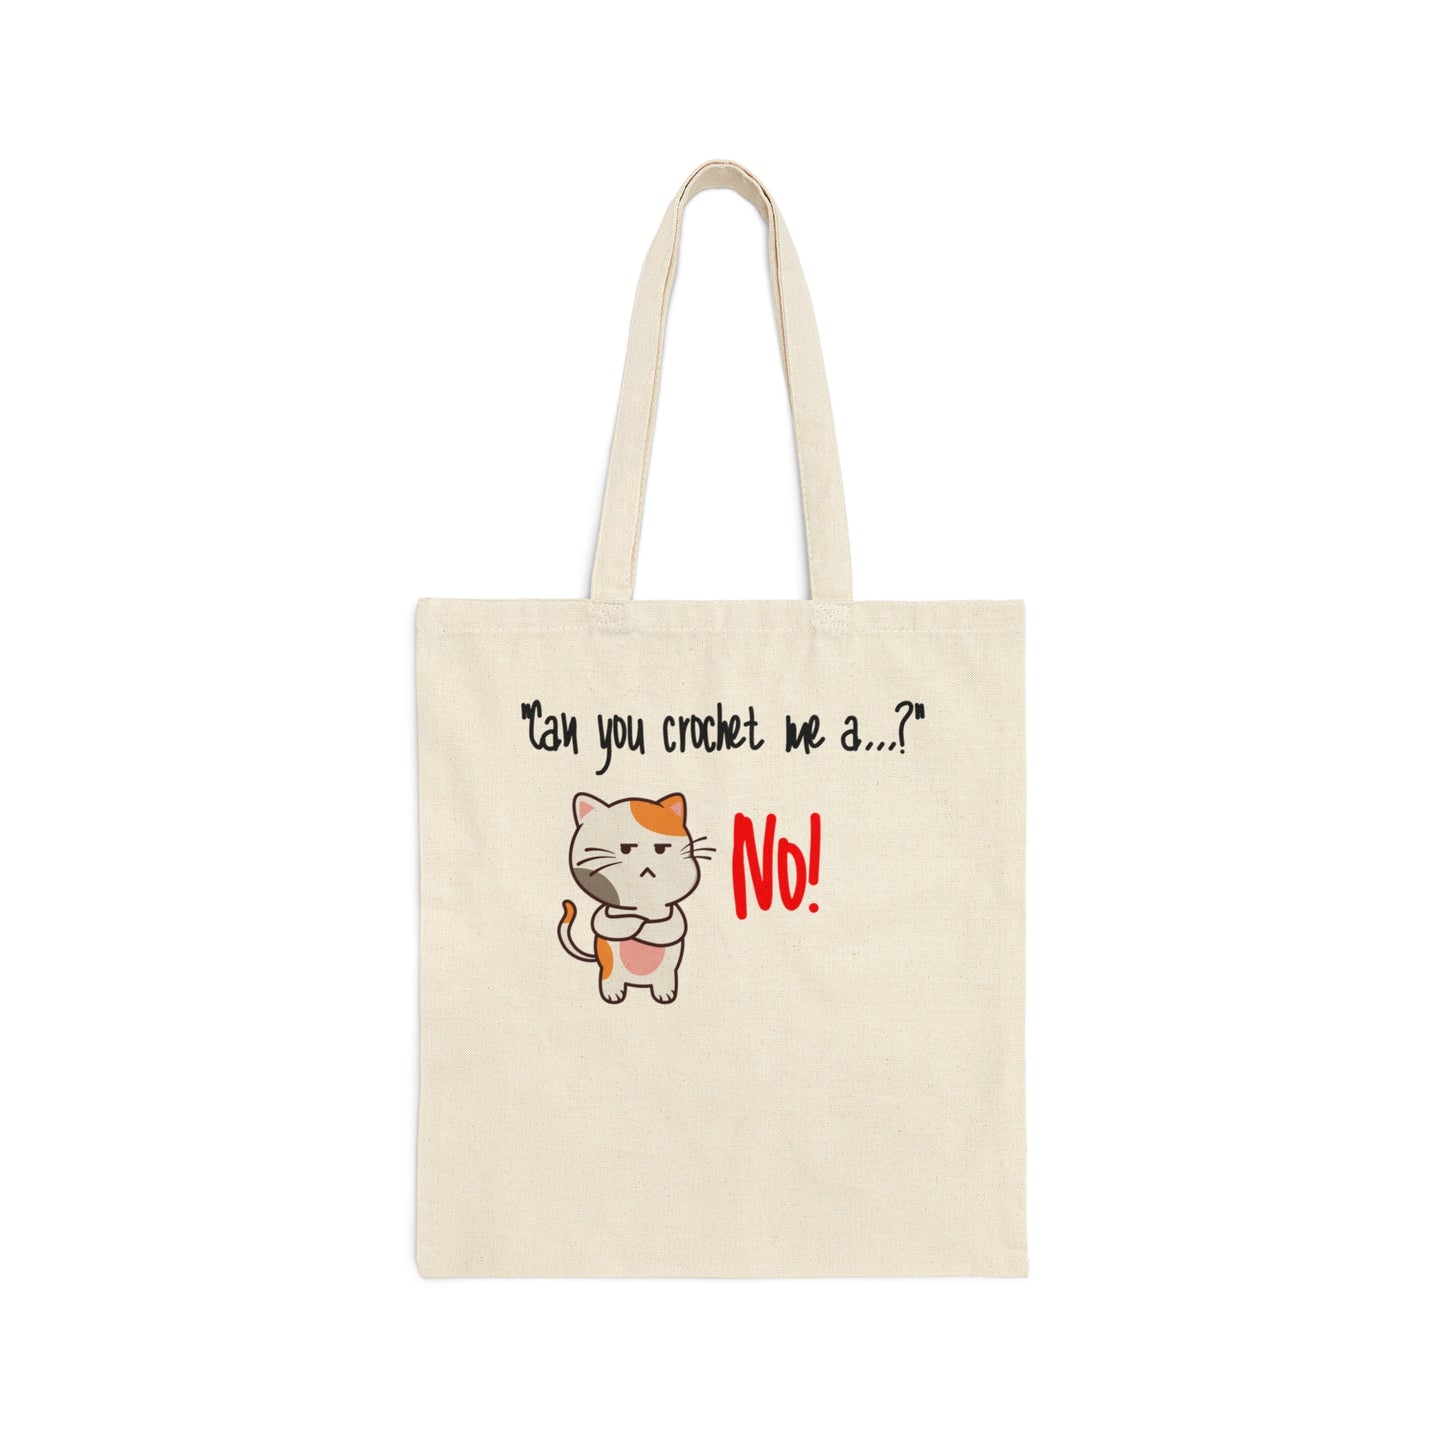 Can you crochet me a...Cotton Canvas Tote Bag